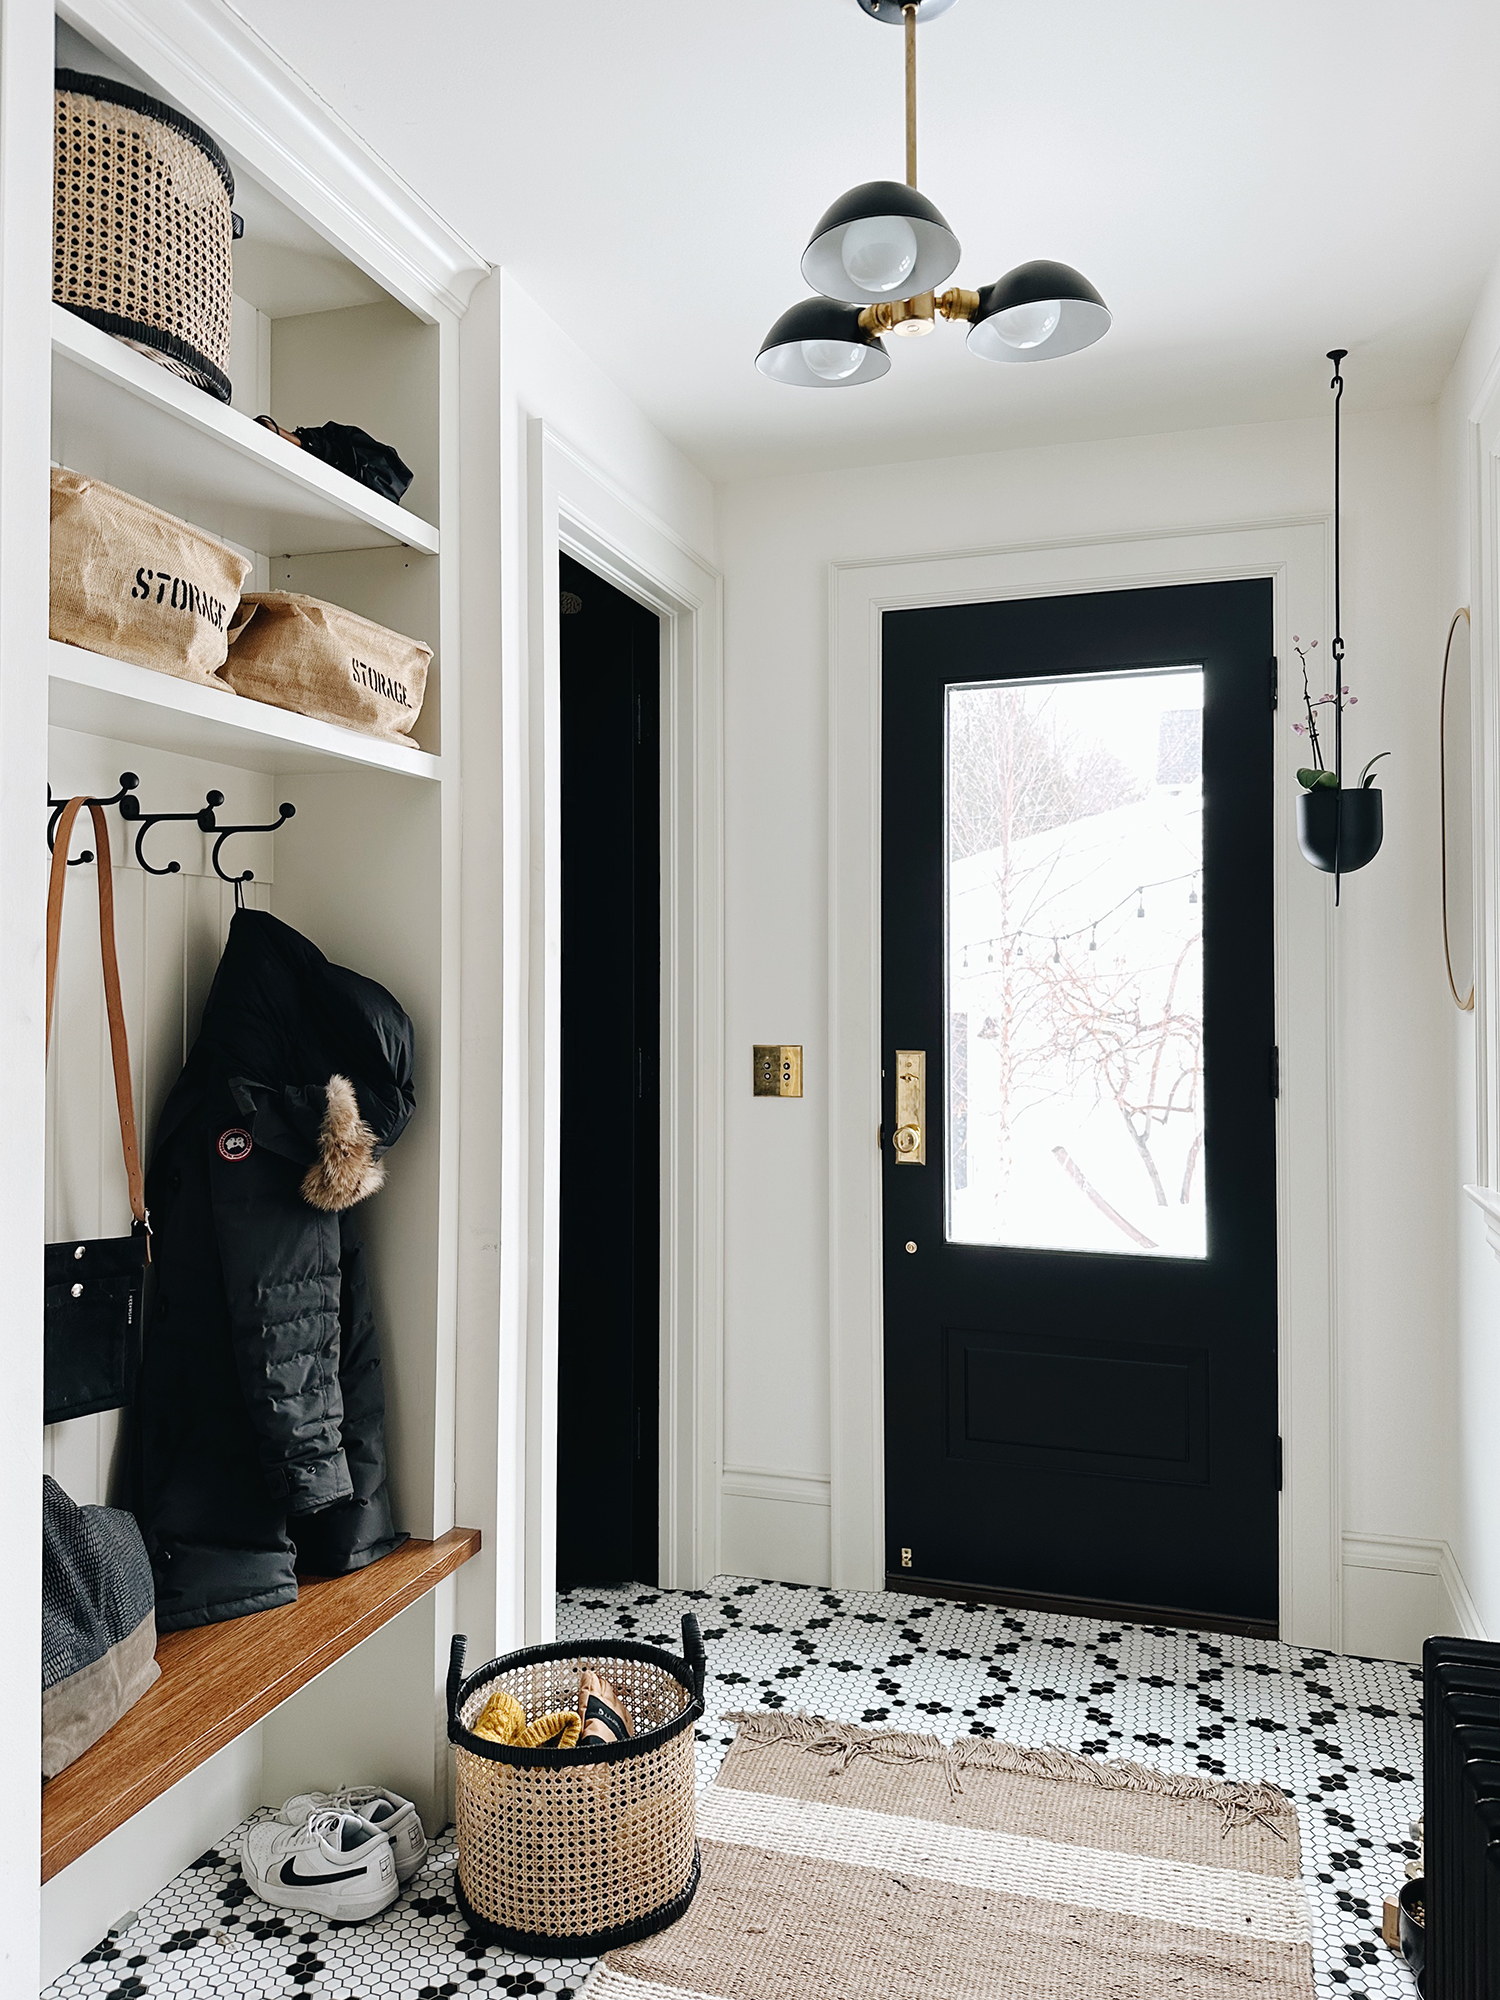 Mudroom with Black and White hexagon tile floor